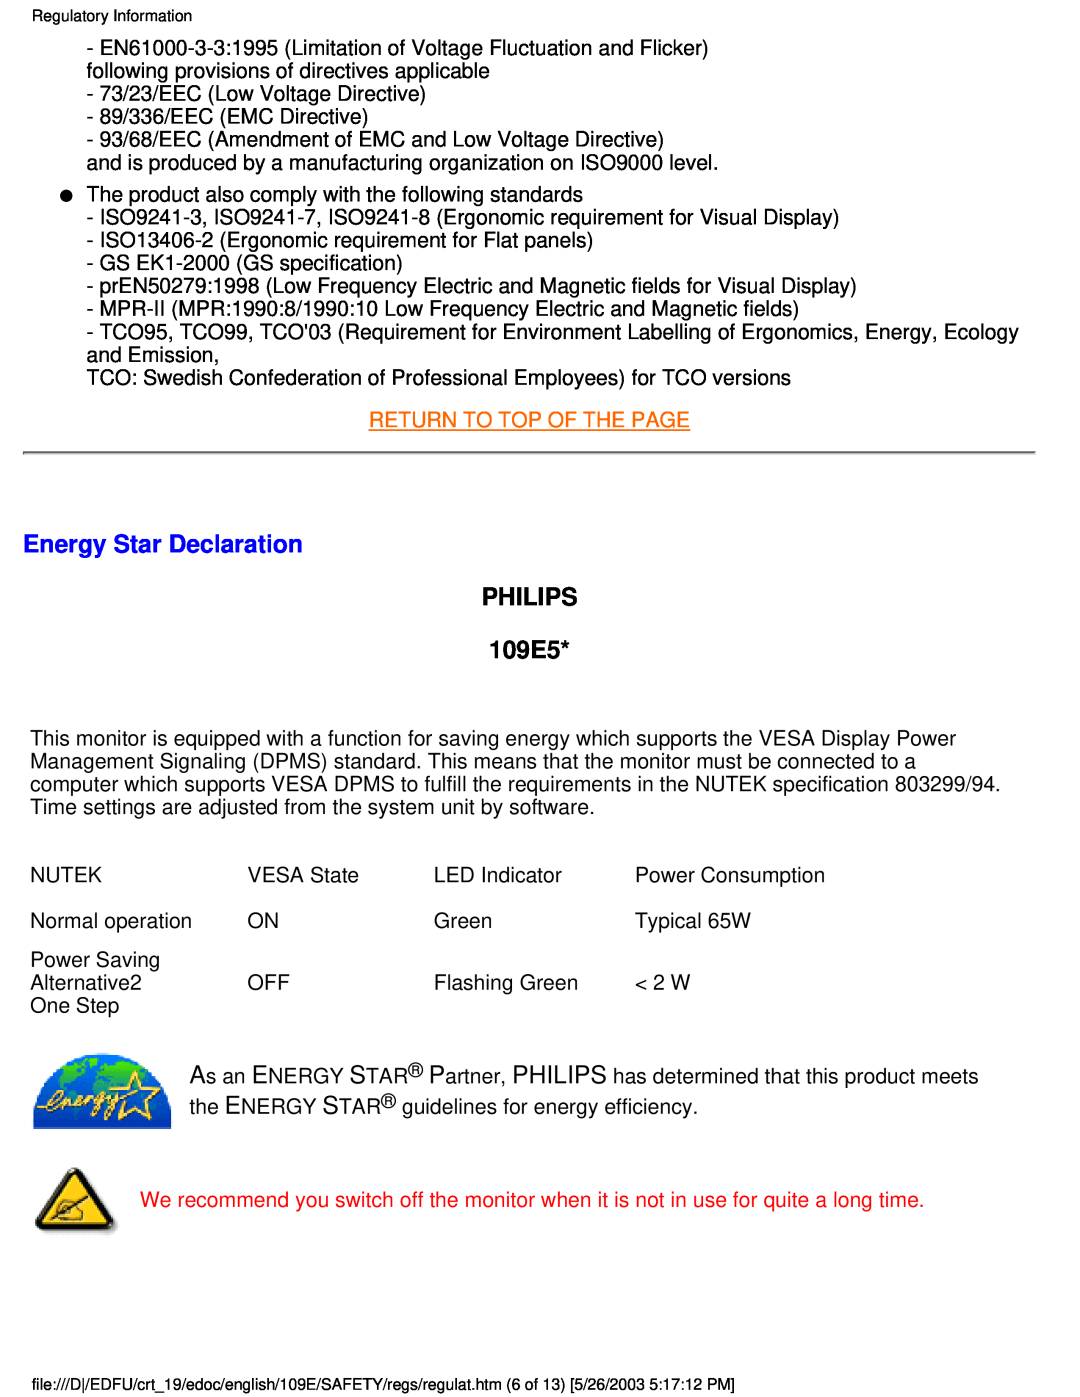 Philips user manual Energy Star Declaration, PHILIPS 109E5, Return To Top Of The Page 